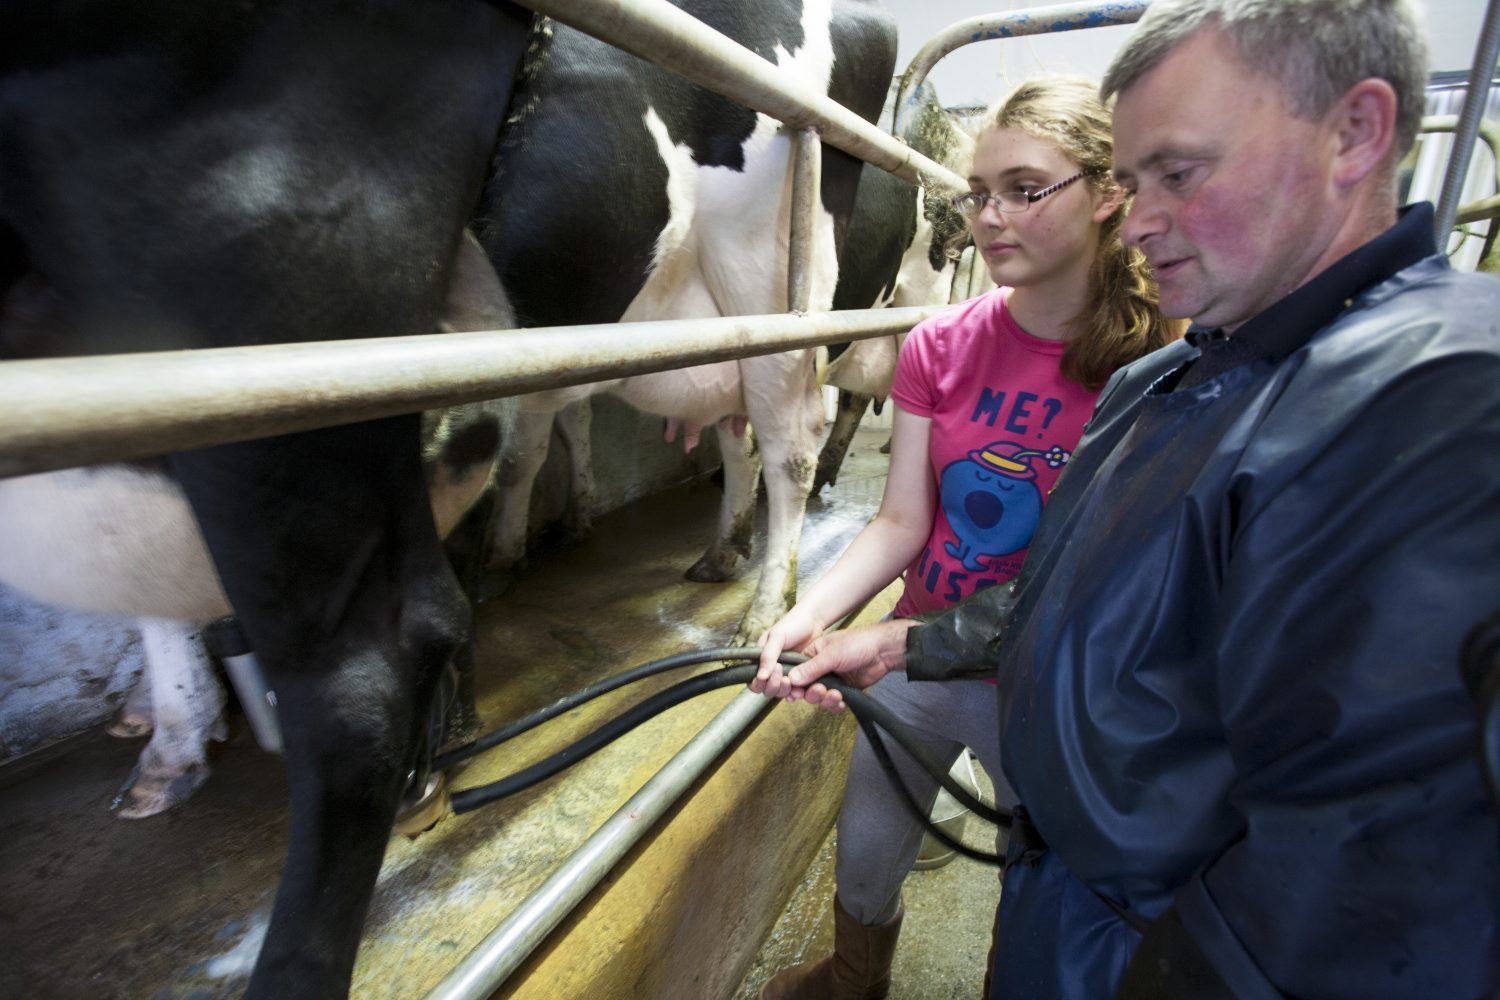 inspecting dairy cows being milked